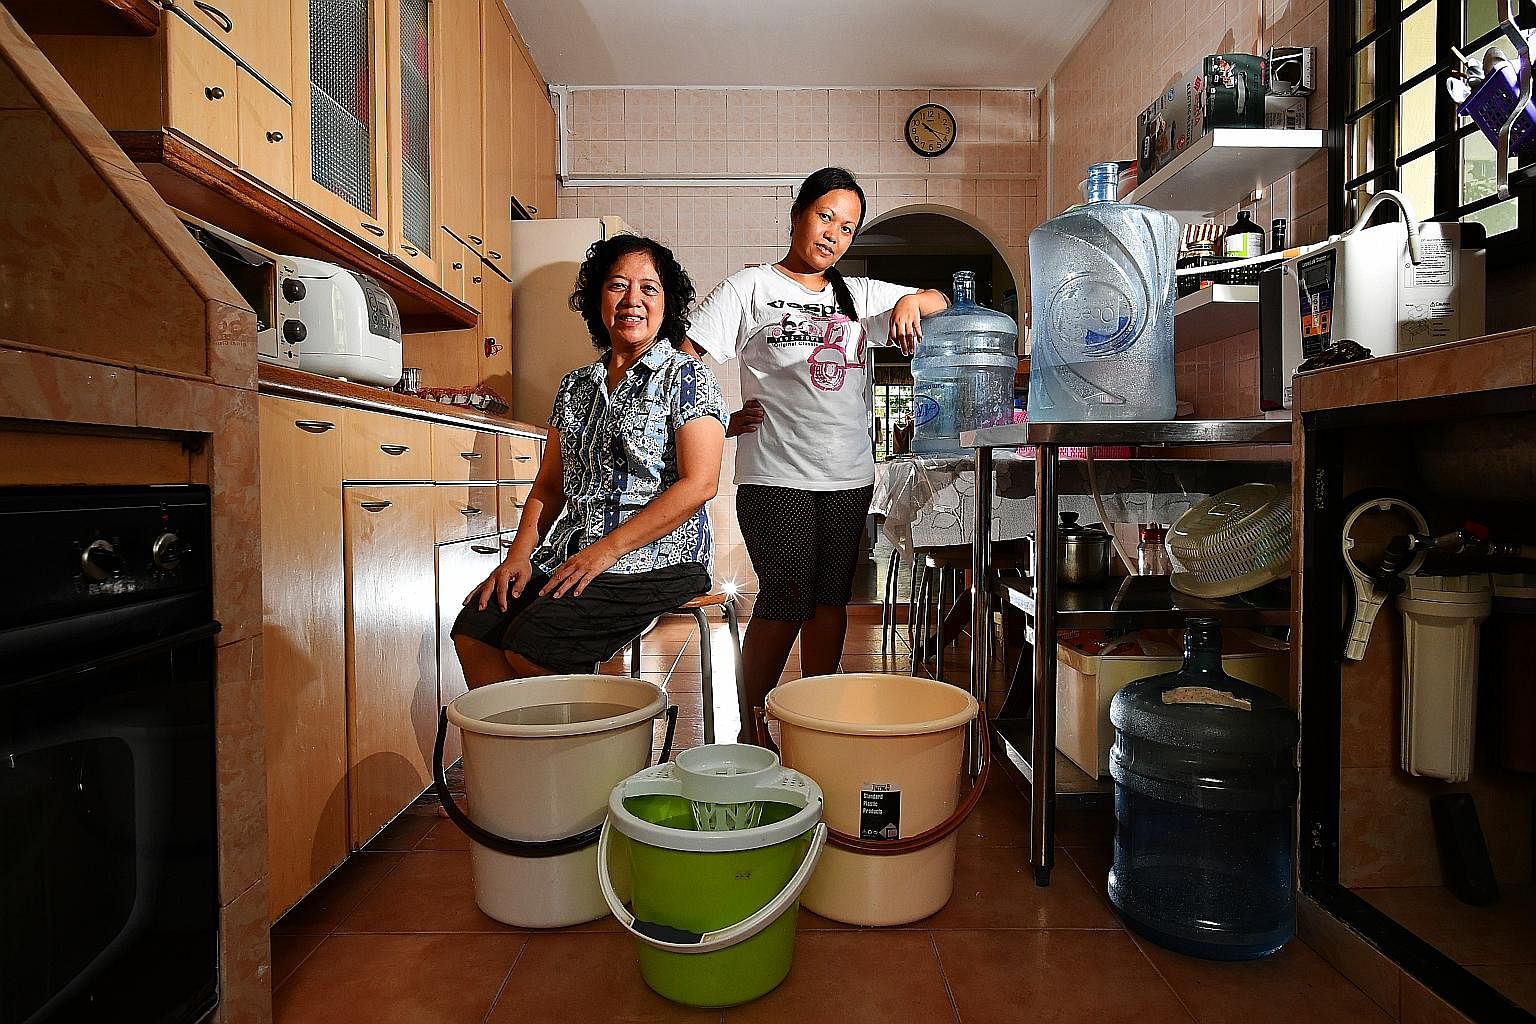 Madam Yeong Soh Yeng, a freelance pre-school teacher, and her Indonesian maid, Madam Fatimah Dulhadi, save water from the washing machine's rinse cycles to wash the floors and flush toilets.